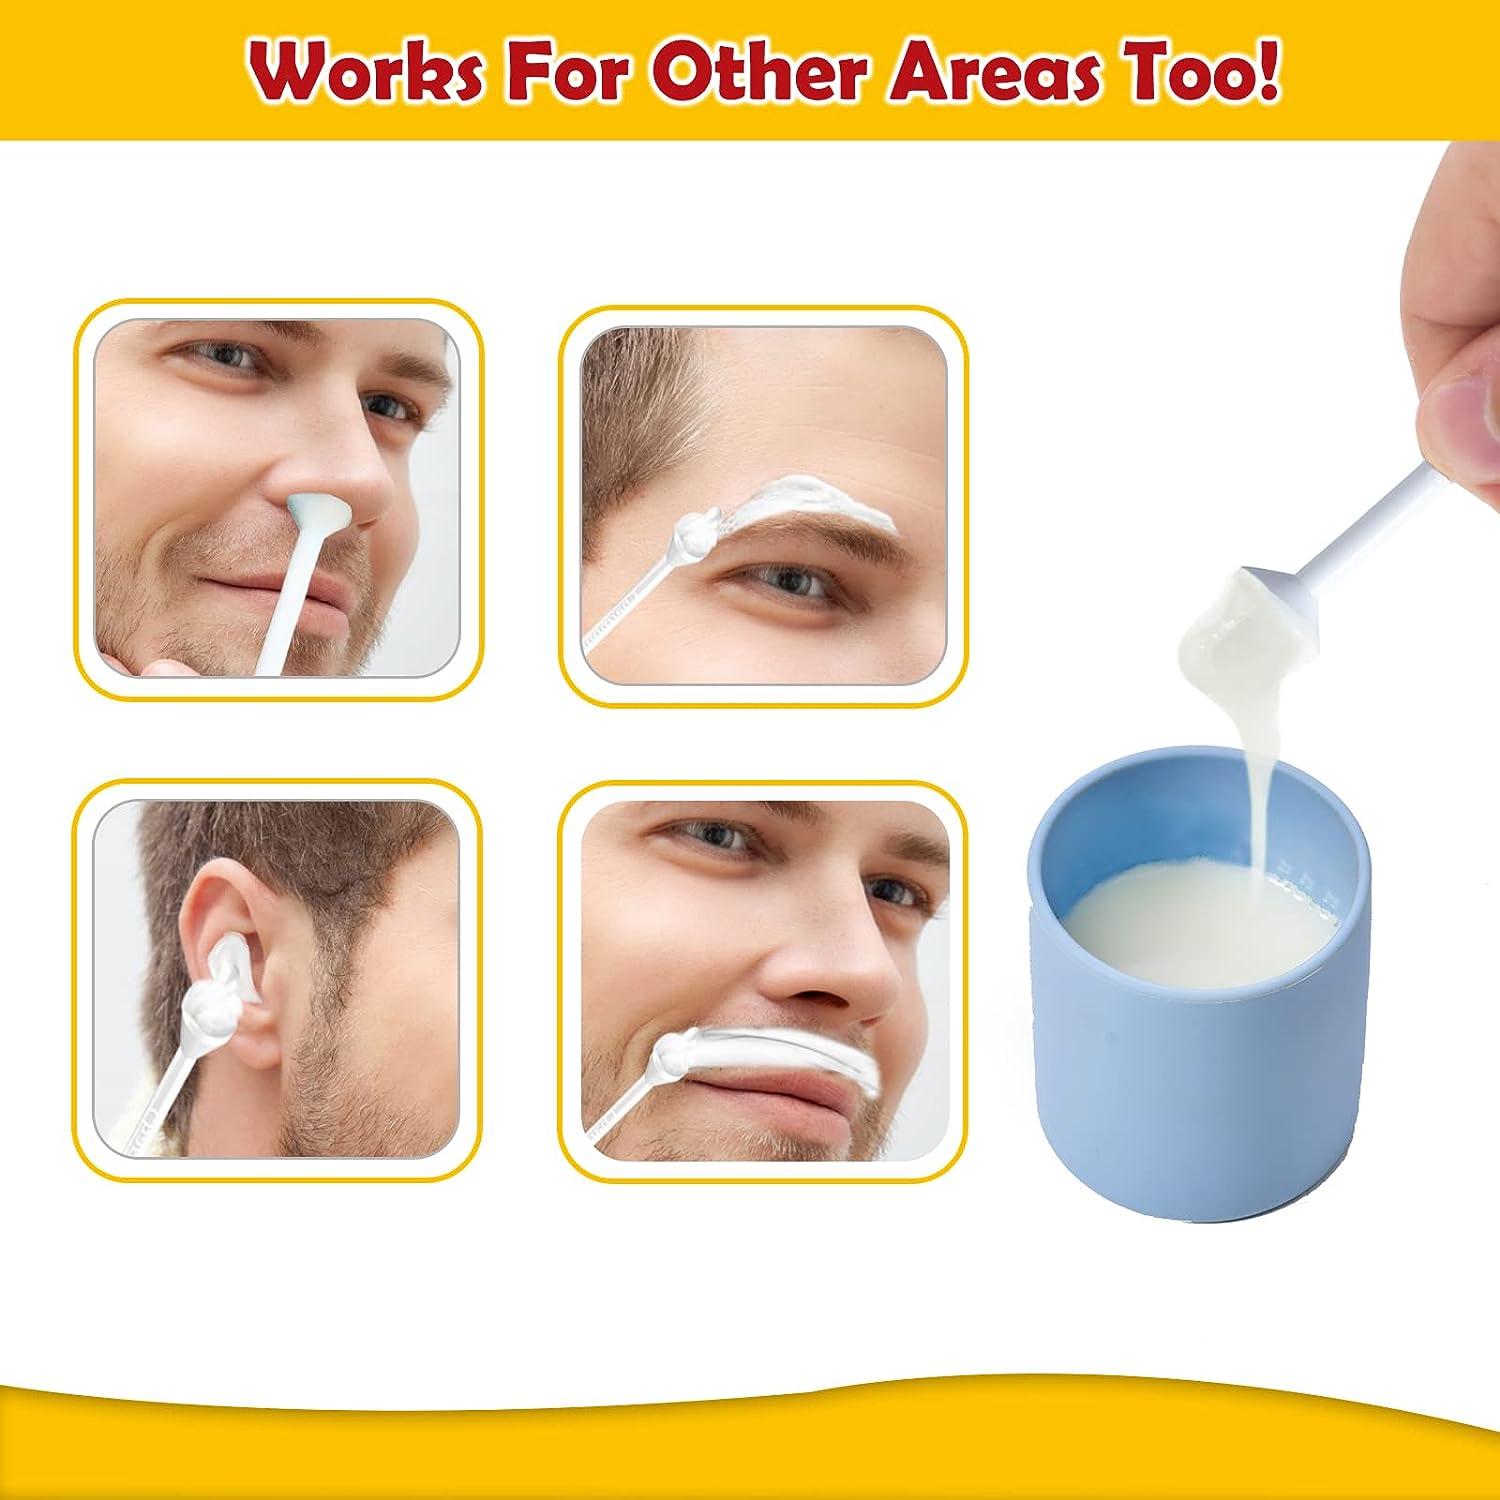 Nose and Ear Wax Kit - Easy Mens Nasal Waxing Strip Remover